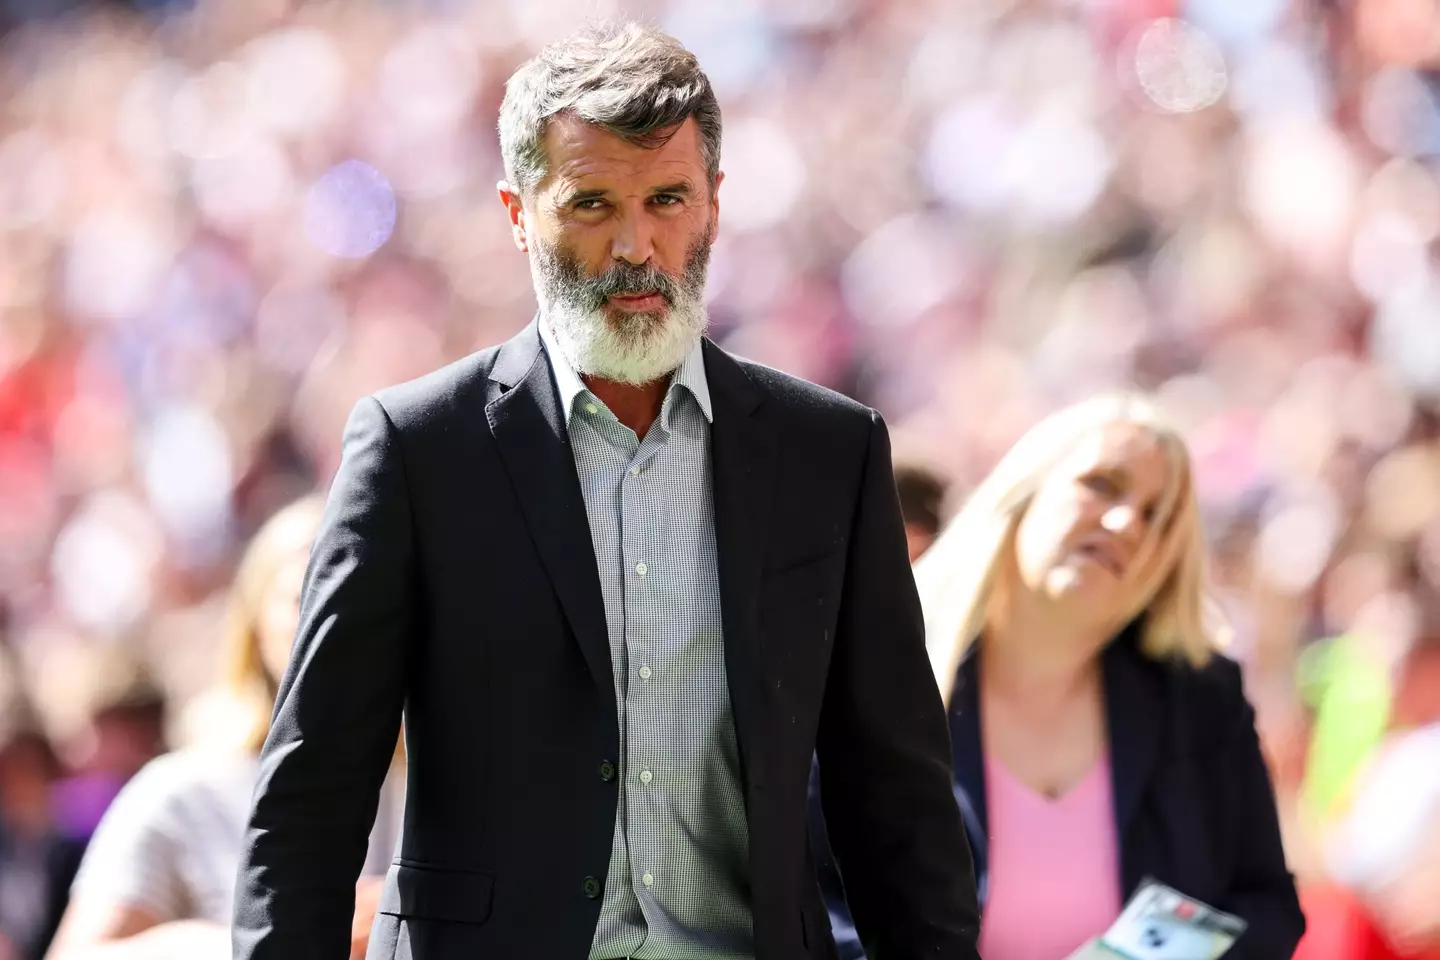 Roy Keane questioned why the players were 'shaking hands before battle'.